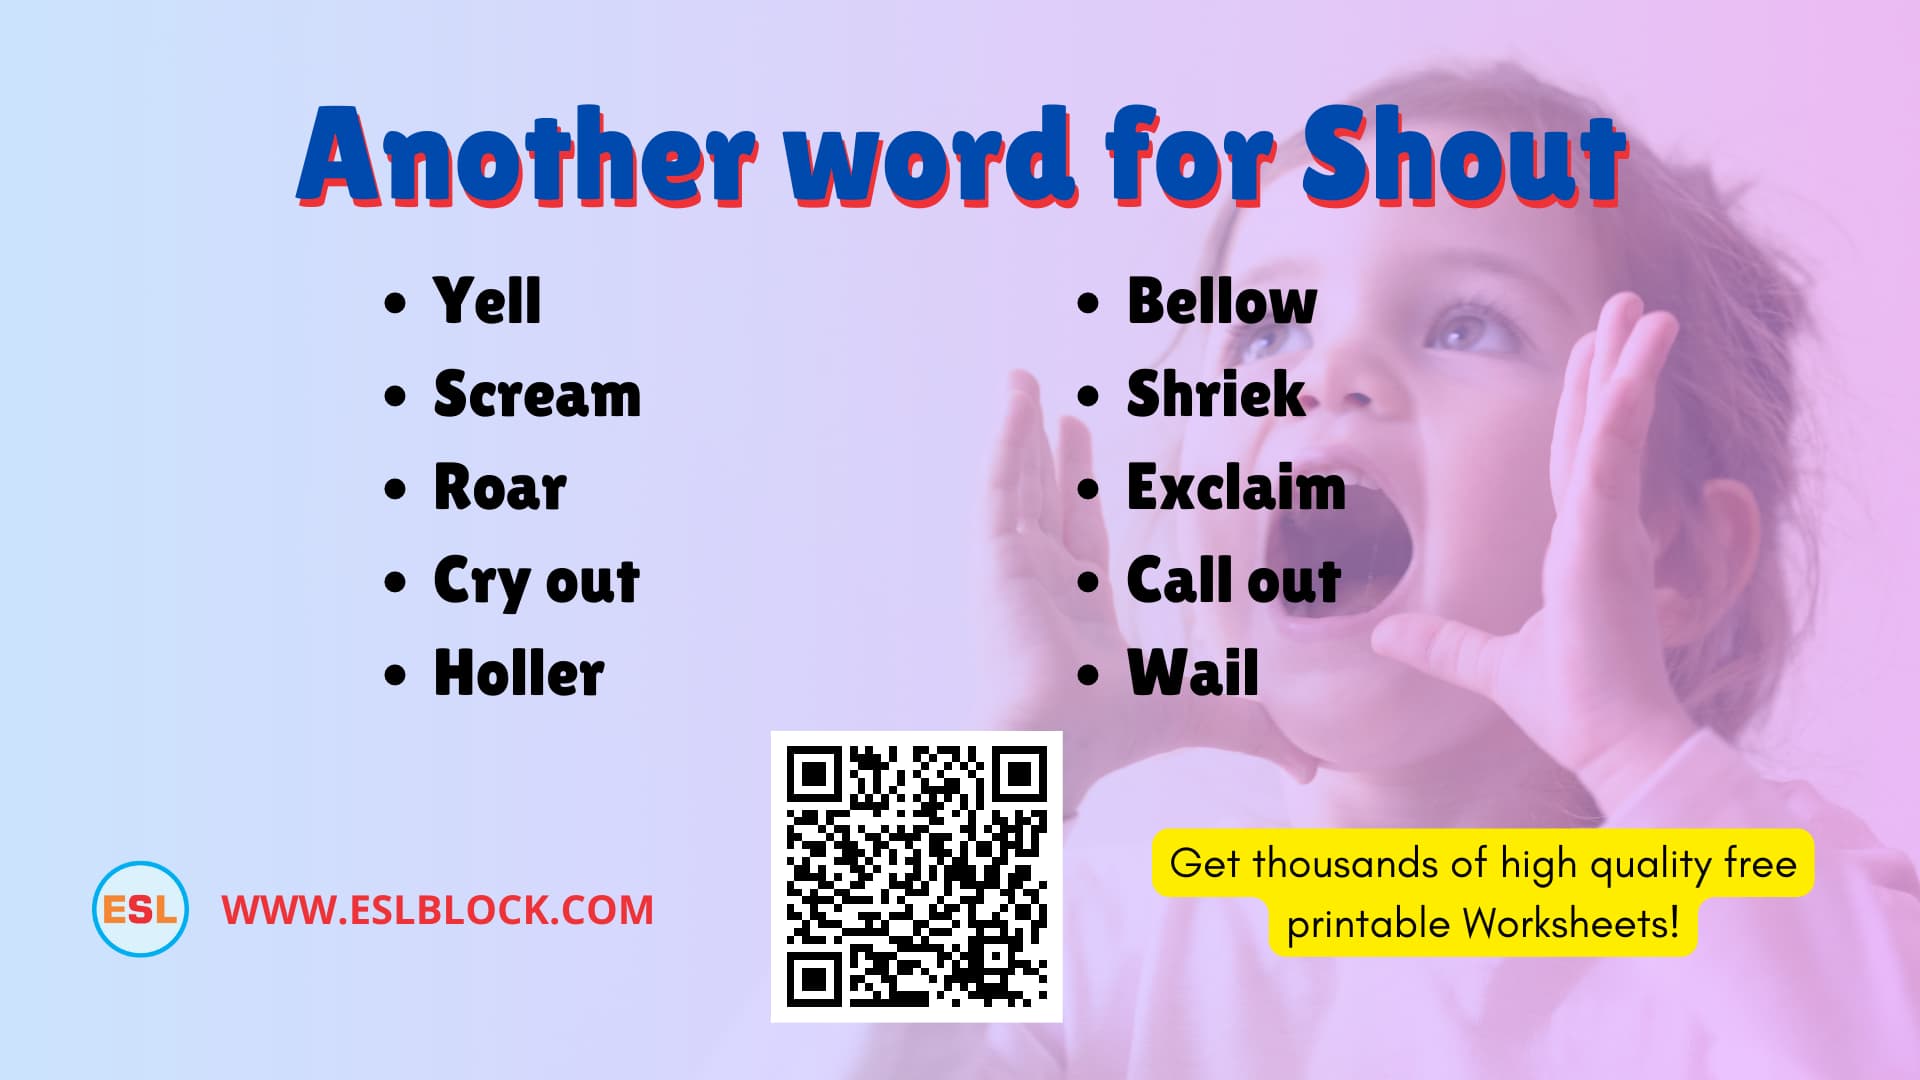 What is another word for Shout